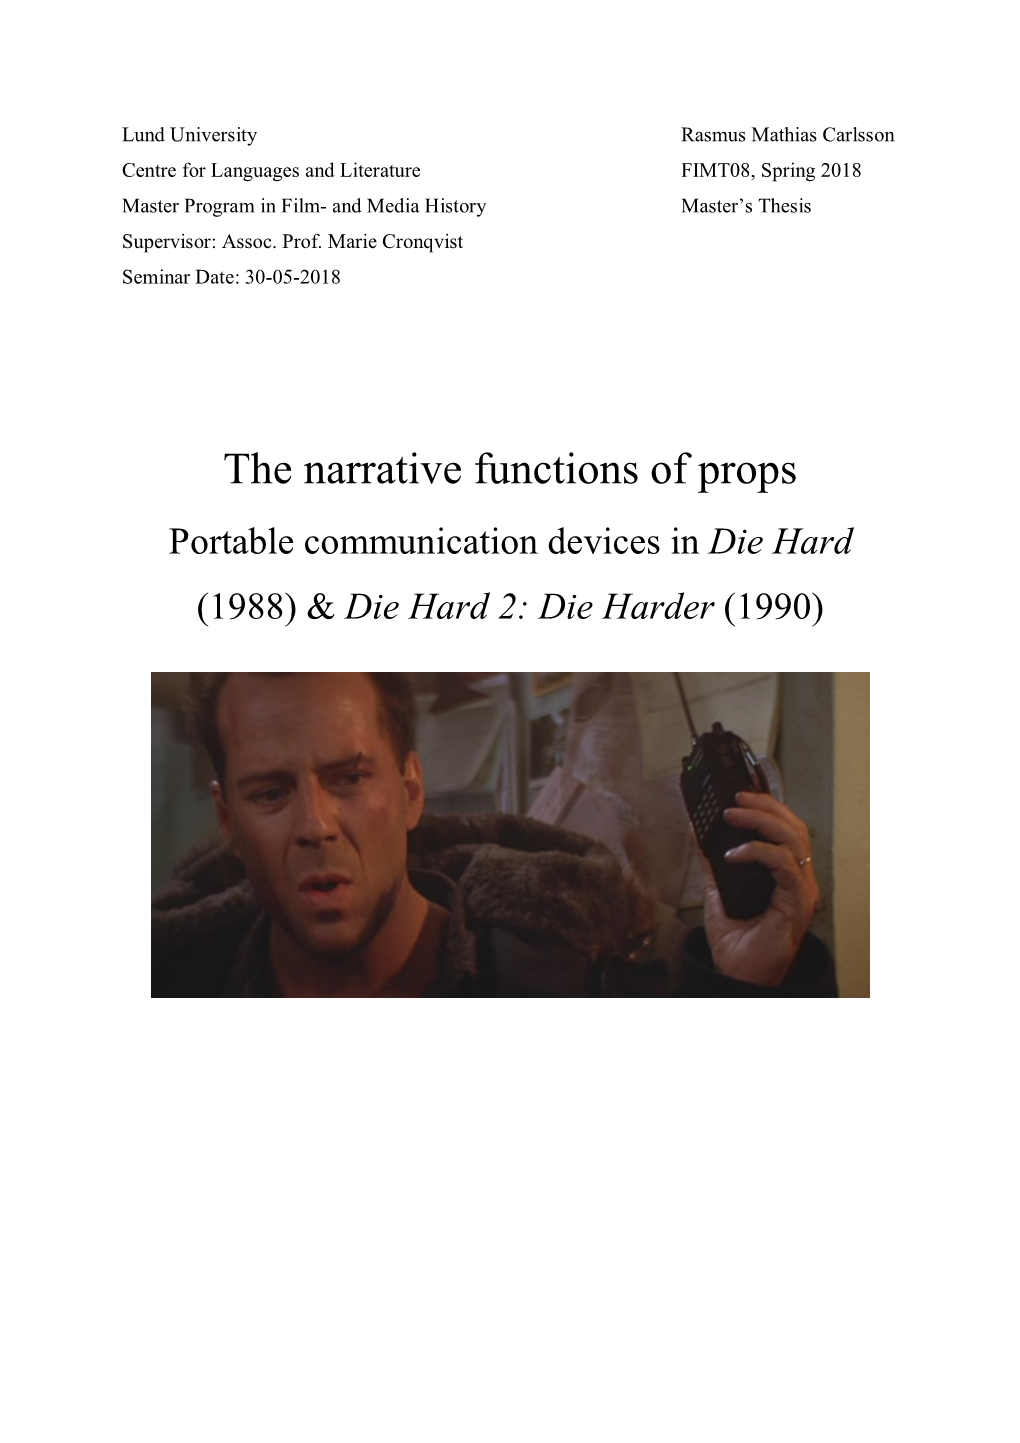 The Narrative Functions of Props Portable Communication Devices in Die Hard (1988) & Die Hard 2: Die Harder (1990)